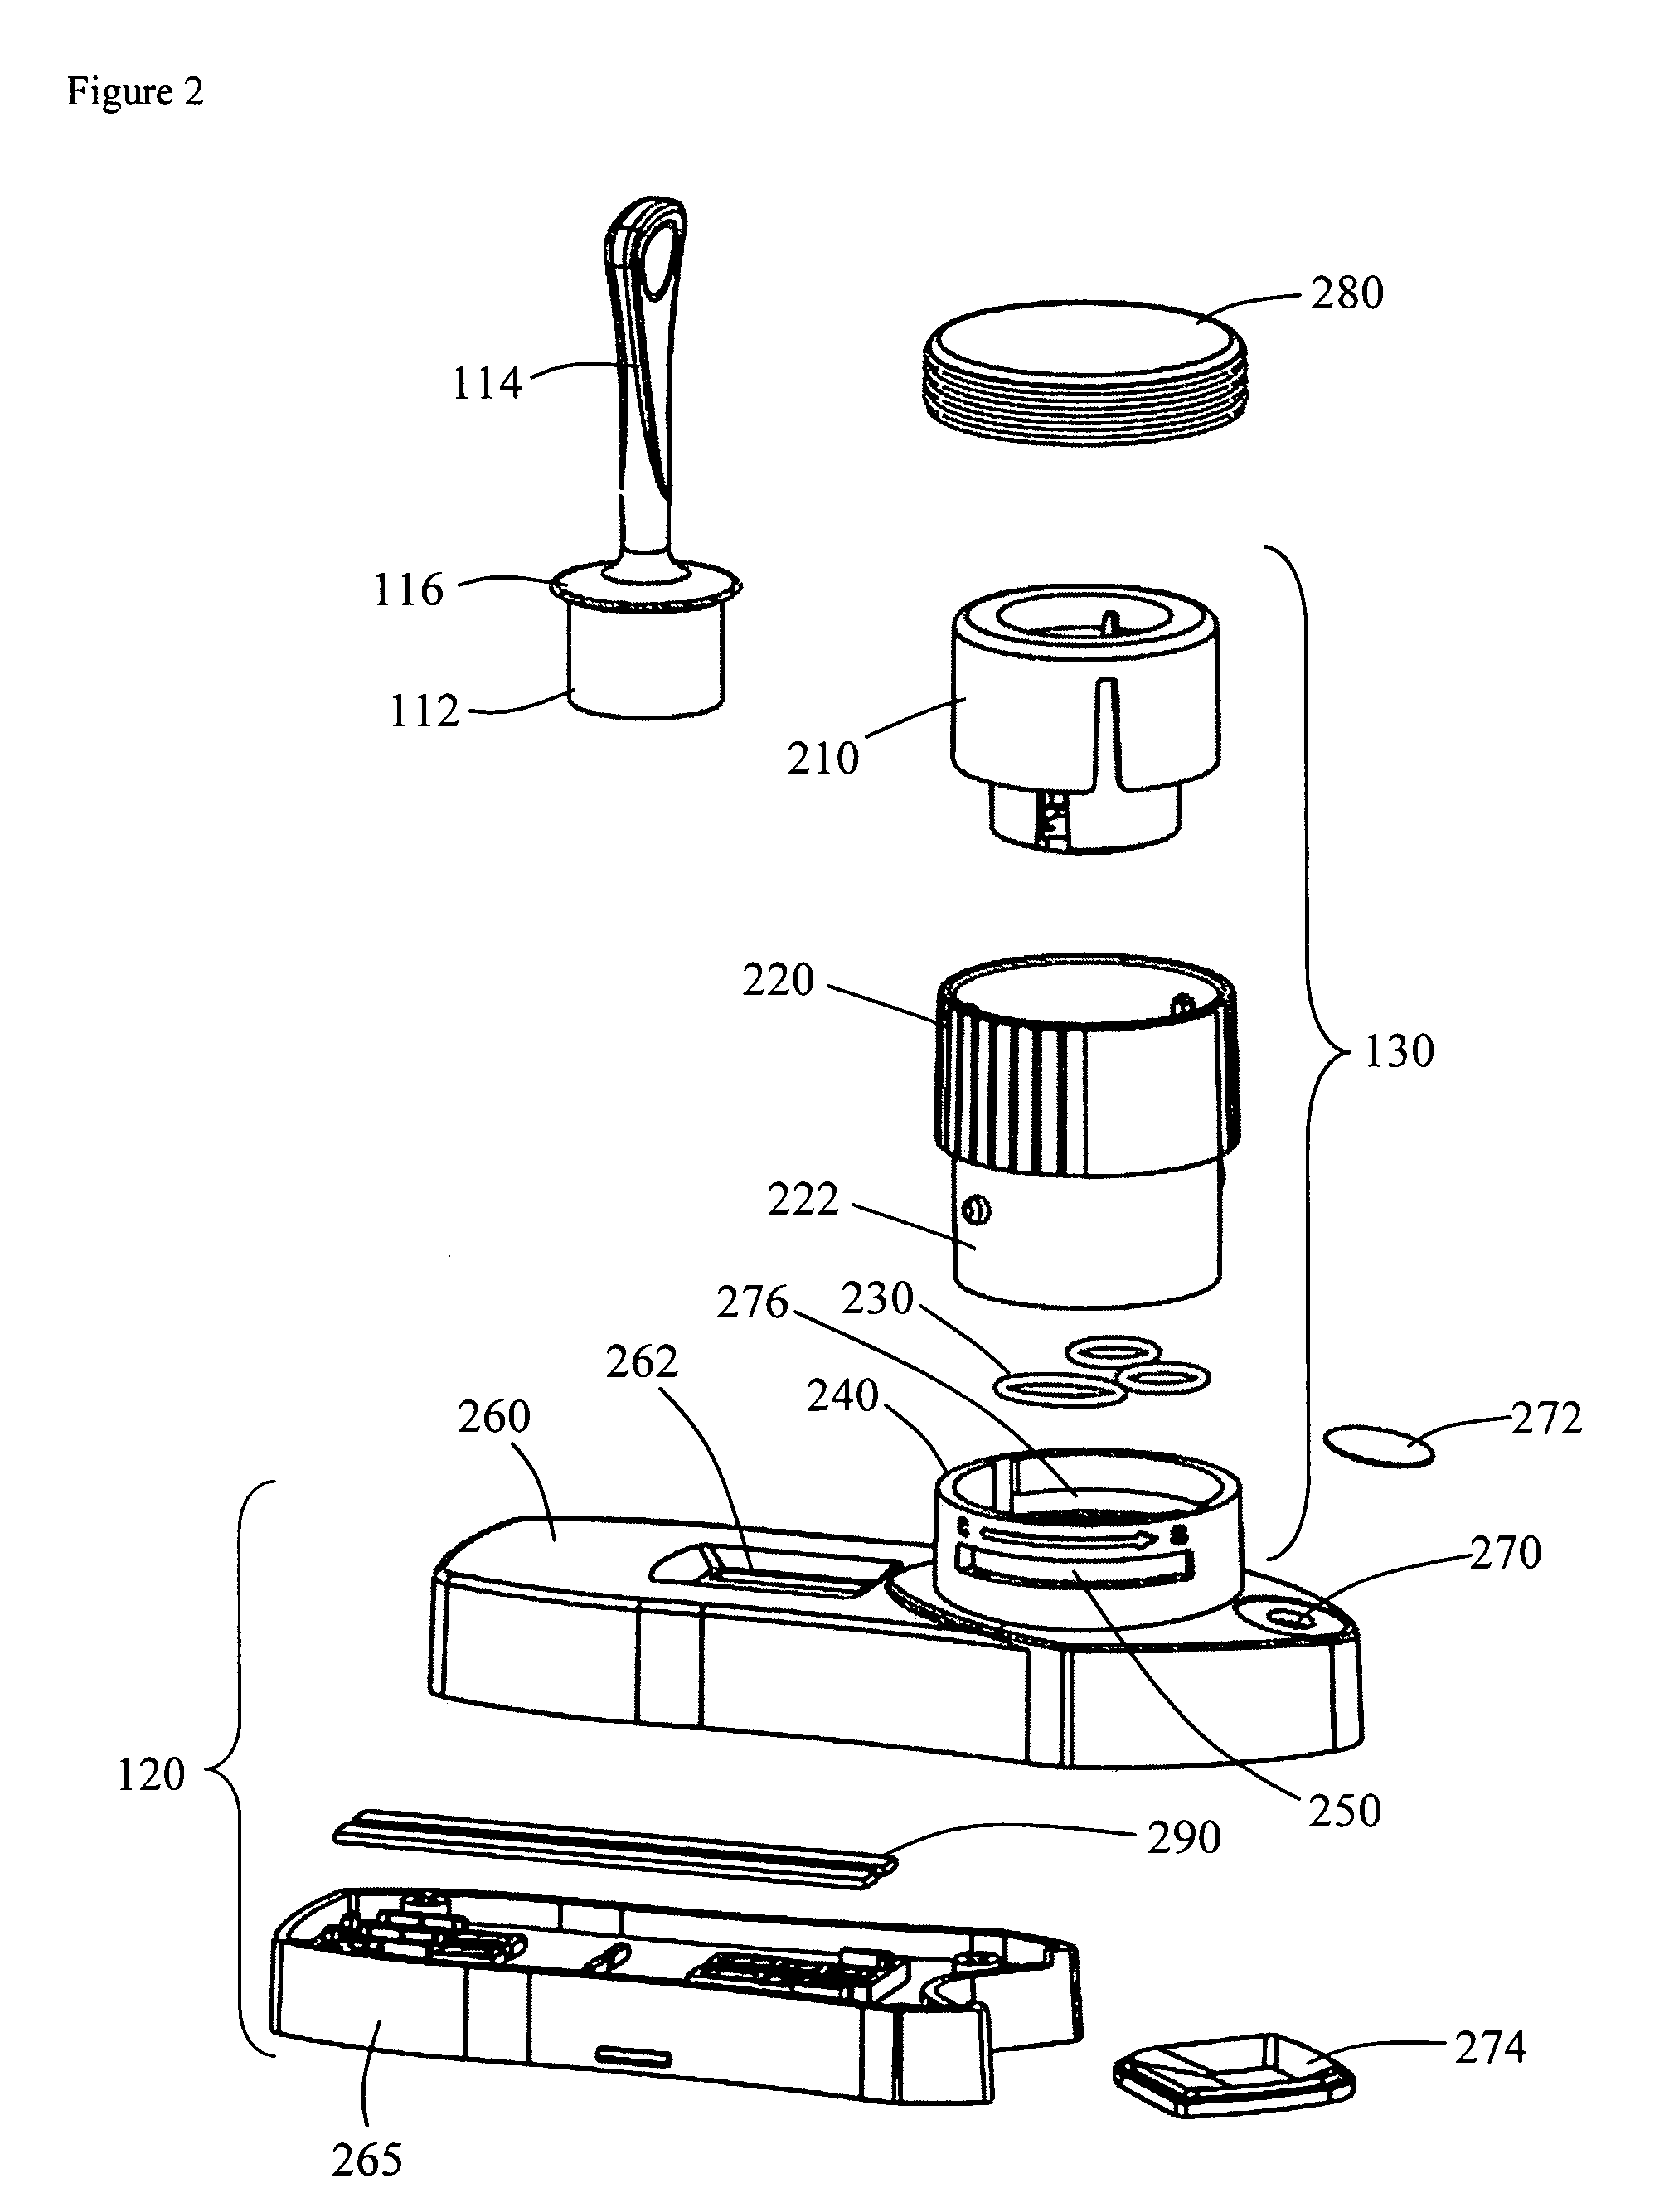 Rapid sample analysis and storage devices and methods of use